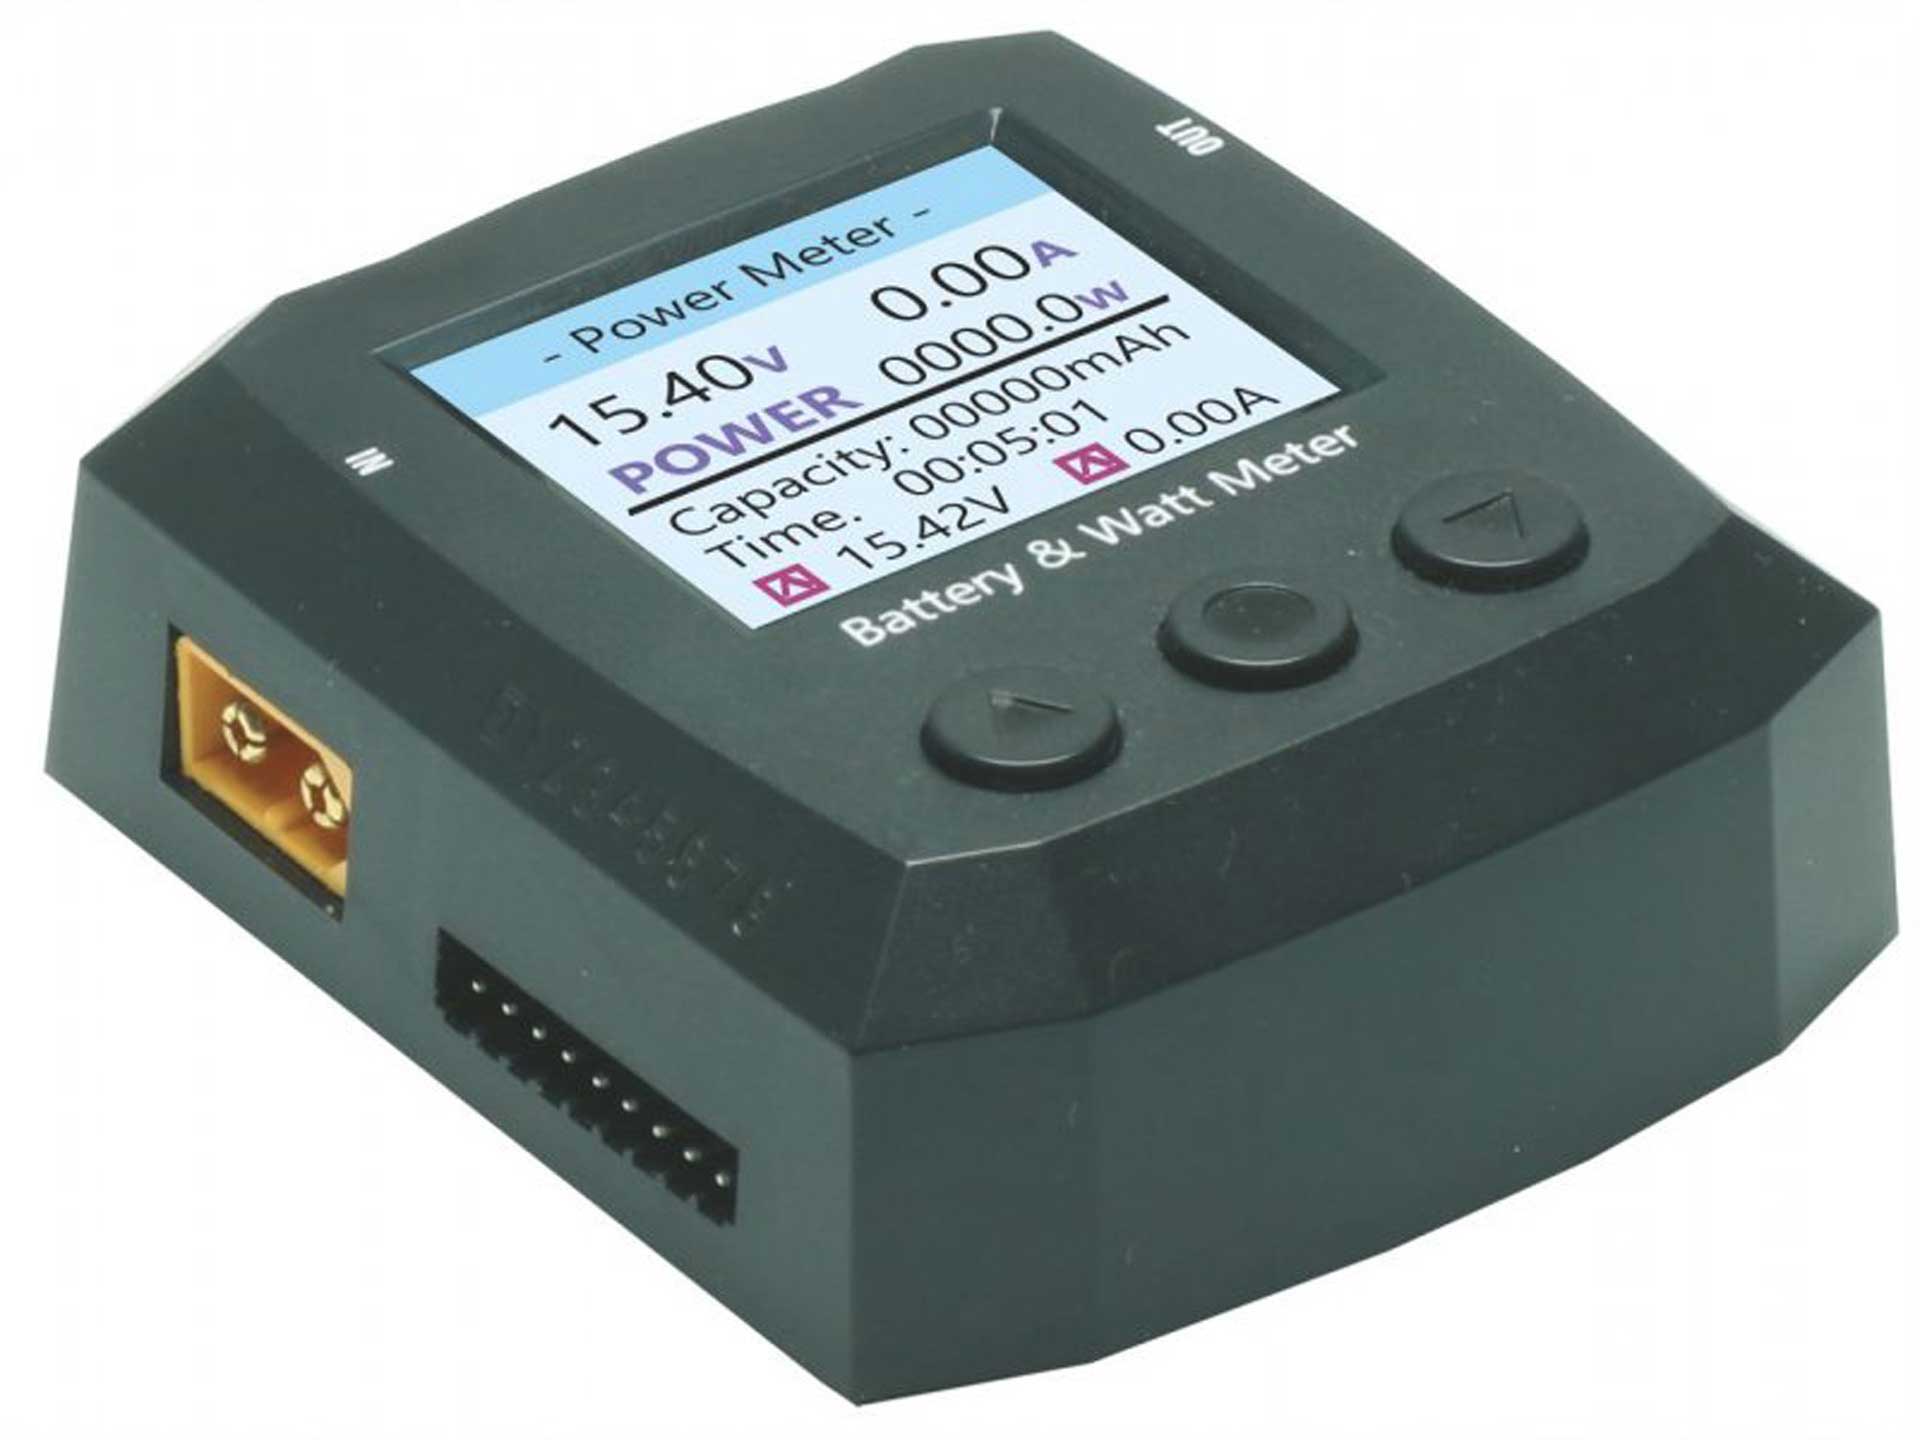 PICHLER MASTER BATTERY POWER METER WITH COLOUR DISPLAY